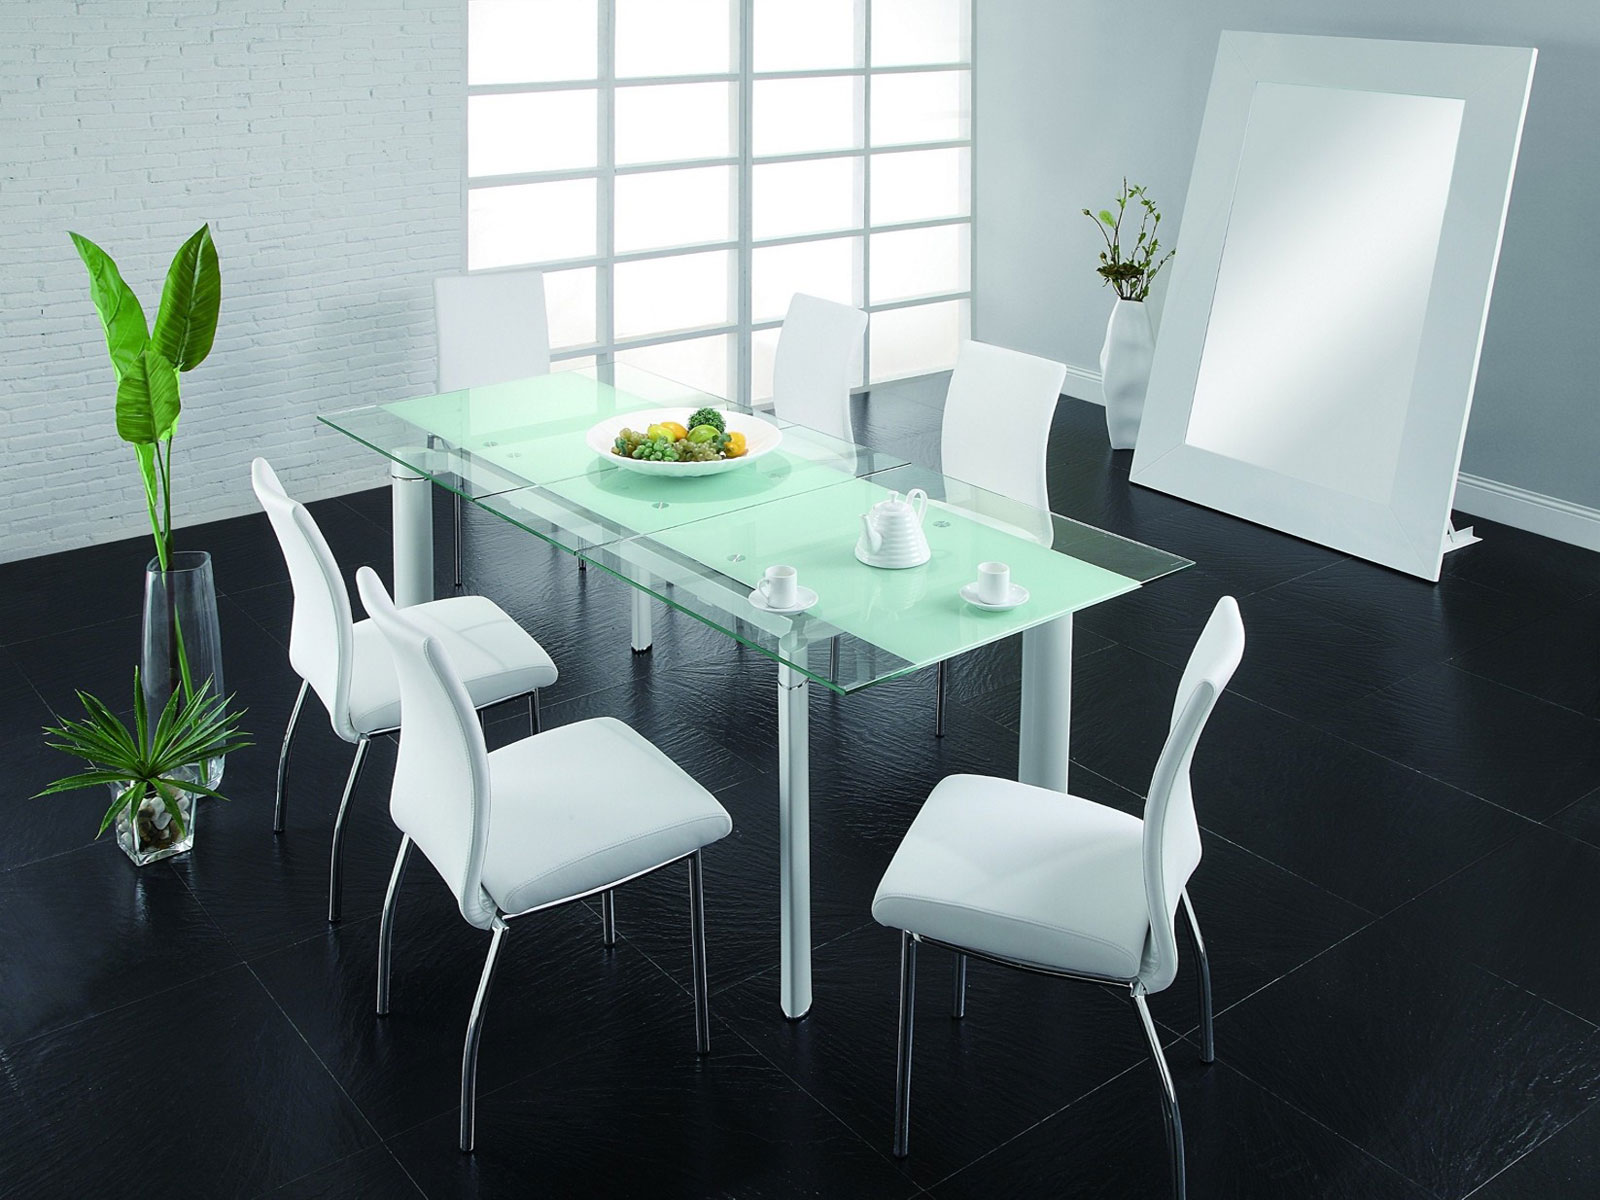 Black Flooring With Cool Black Flooring Tile Matched With White Furniture Of Modern Dining Room Sets Completed With Glass Table Coupled With Chairs And Furnished With Large Mirror Dining Room The Best Modern Dining Room Sets